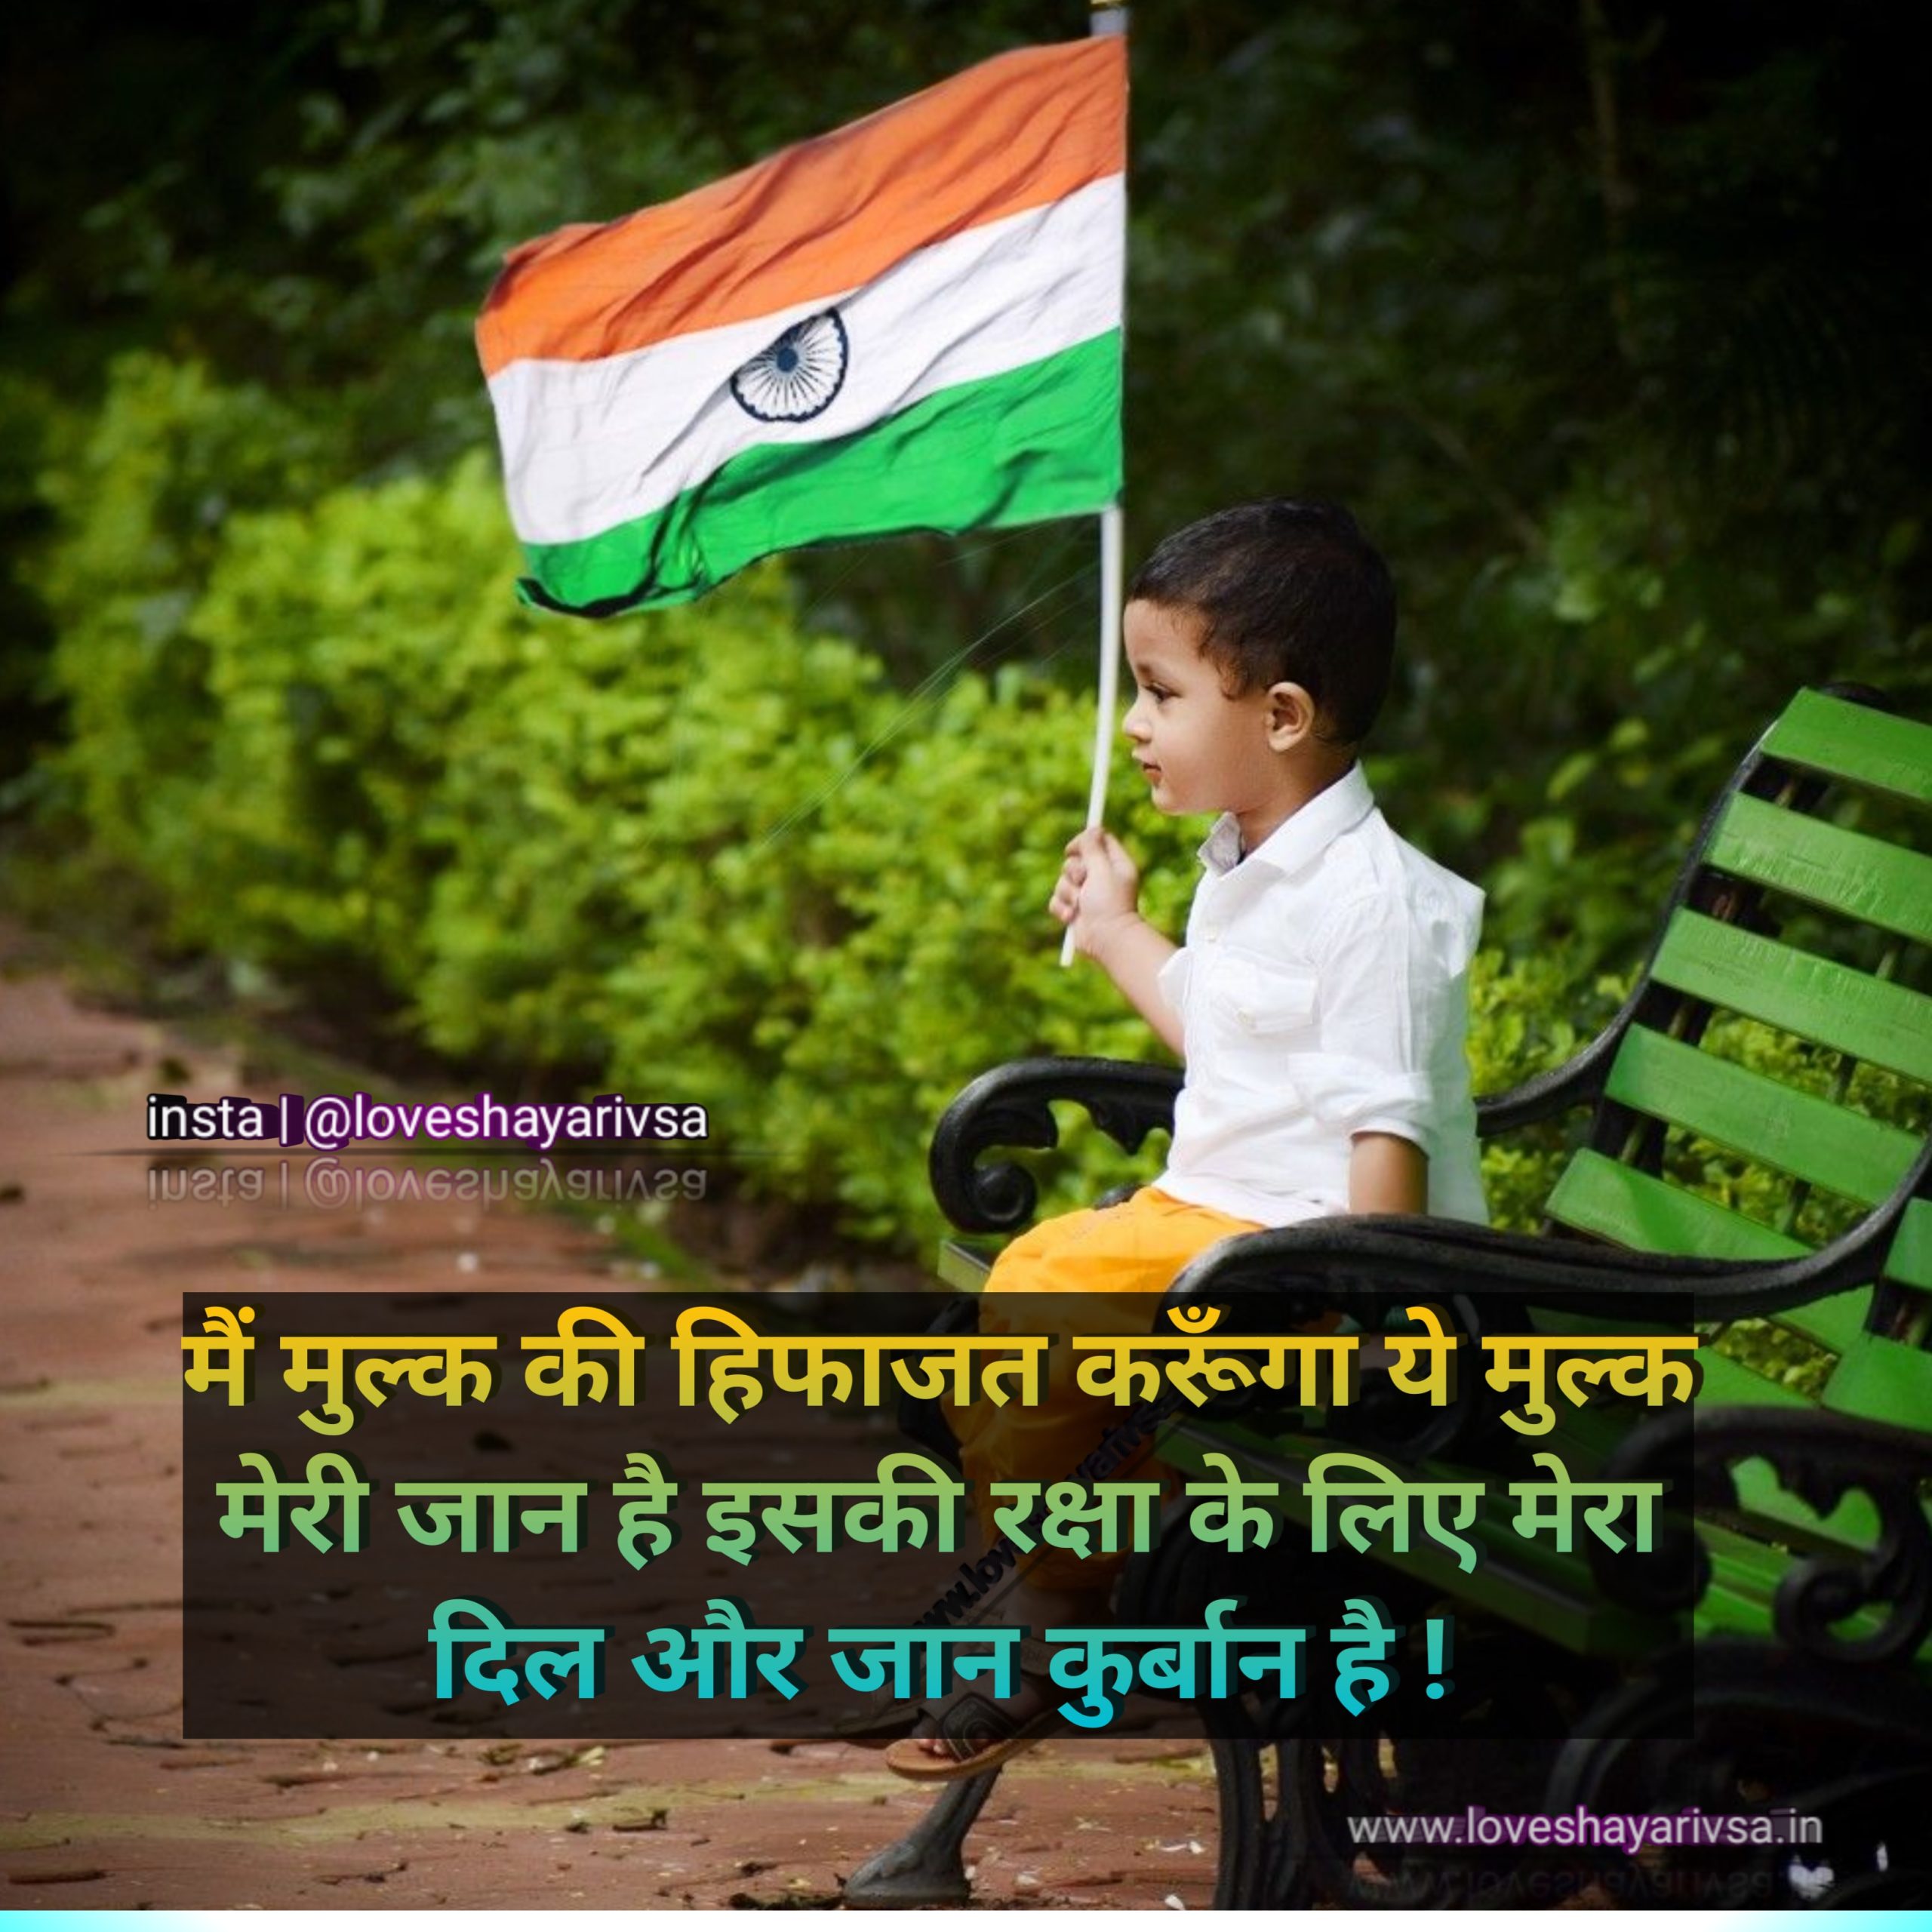 "A Young Boy Wrapped in the Tricolor, Standing Tall as a Symbol of India's Bright Future and Aspirations on Independence Day 🇮🇳✨ #PatrioticYouth #FutureLeaders"